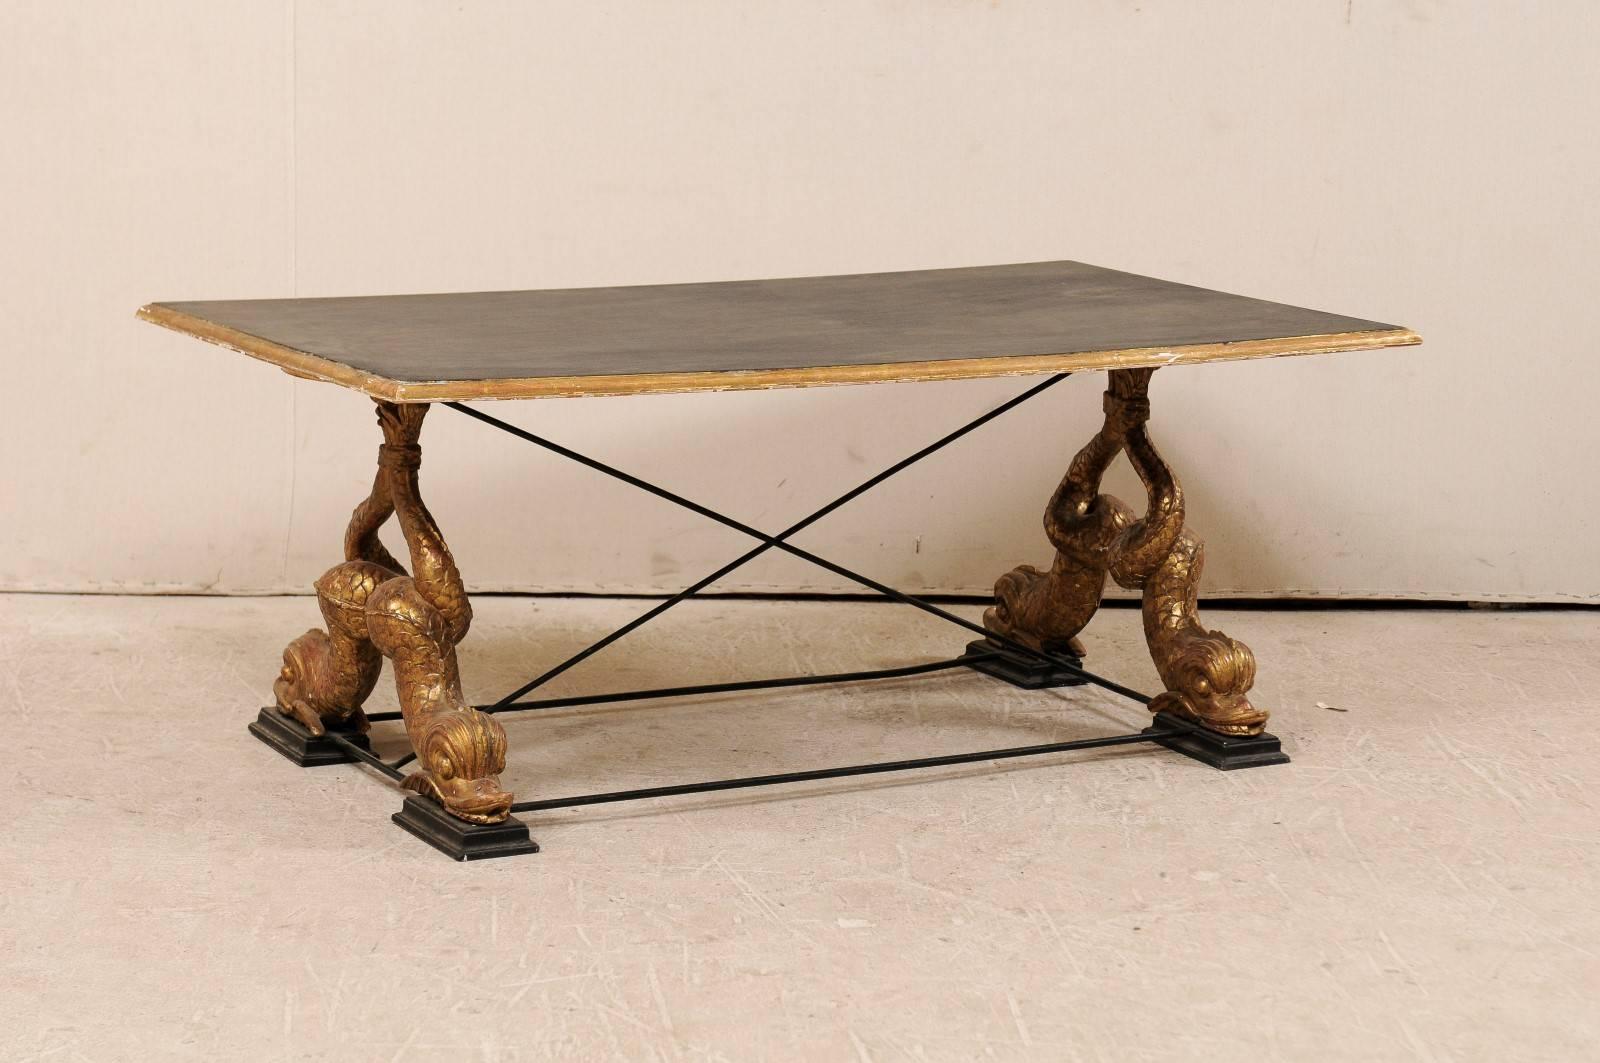 An Italian mid-20th century coffee table. This coffee table features a painted wood top which is held up by carved wood mythological fish. These mythological creatures have long, twisted and richly scaled bodies, the tips of the tails join together